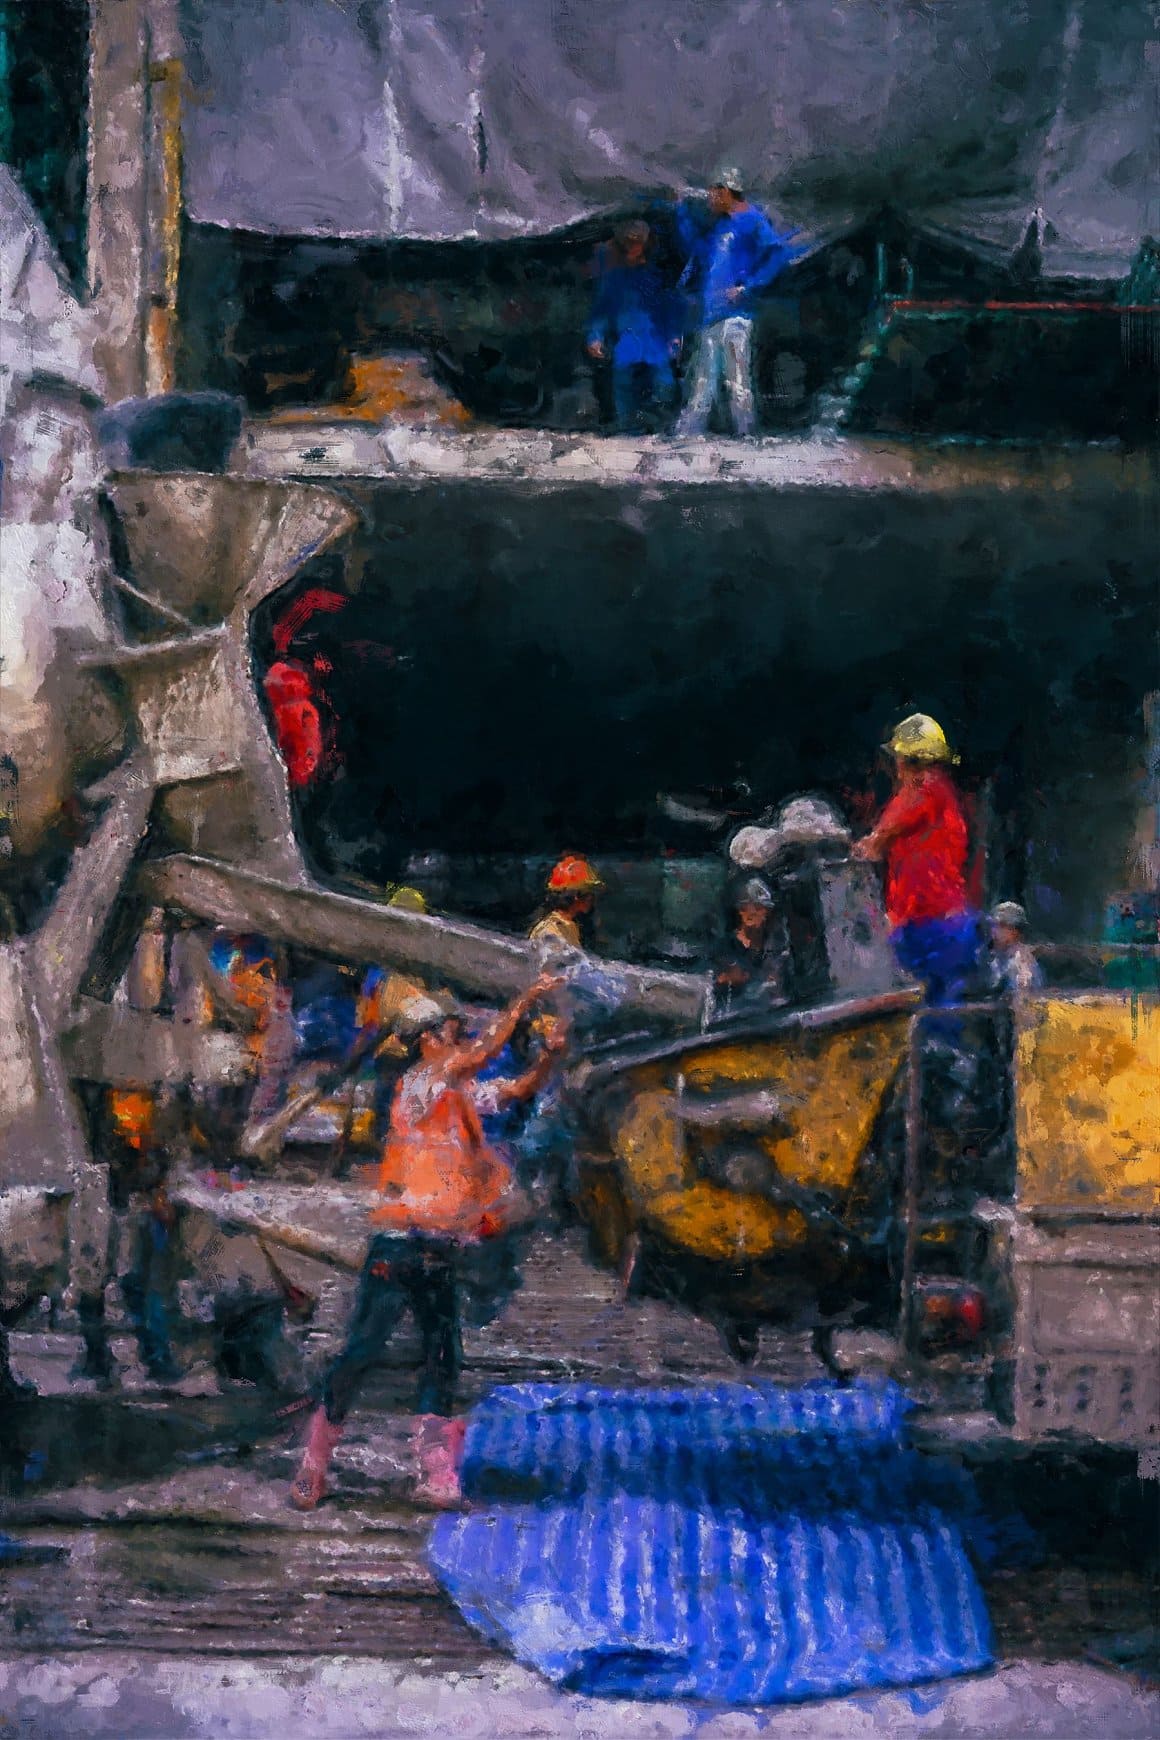 Image of construction using Painted Photoshop Effect.